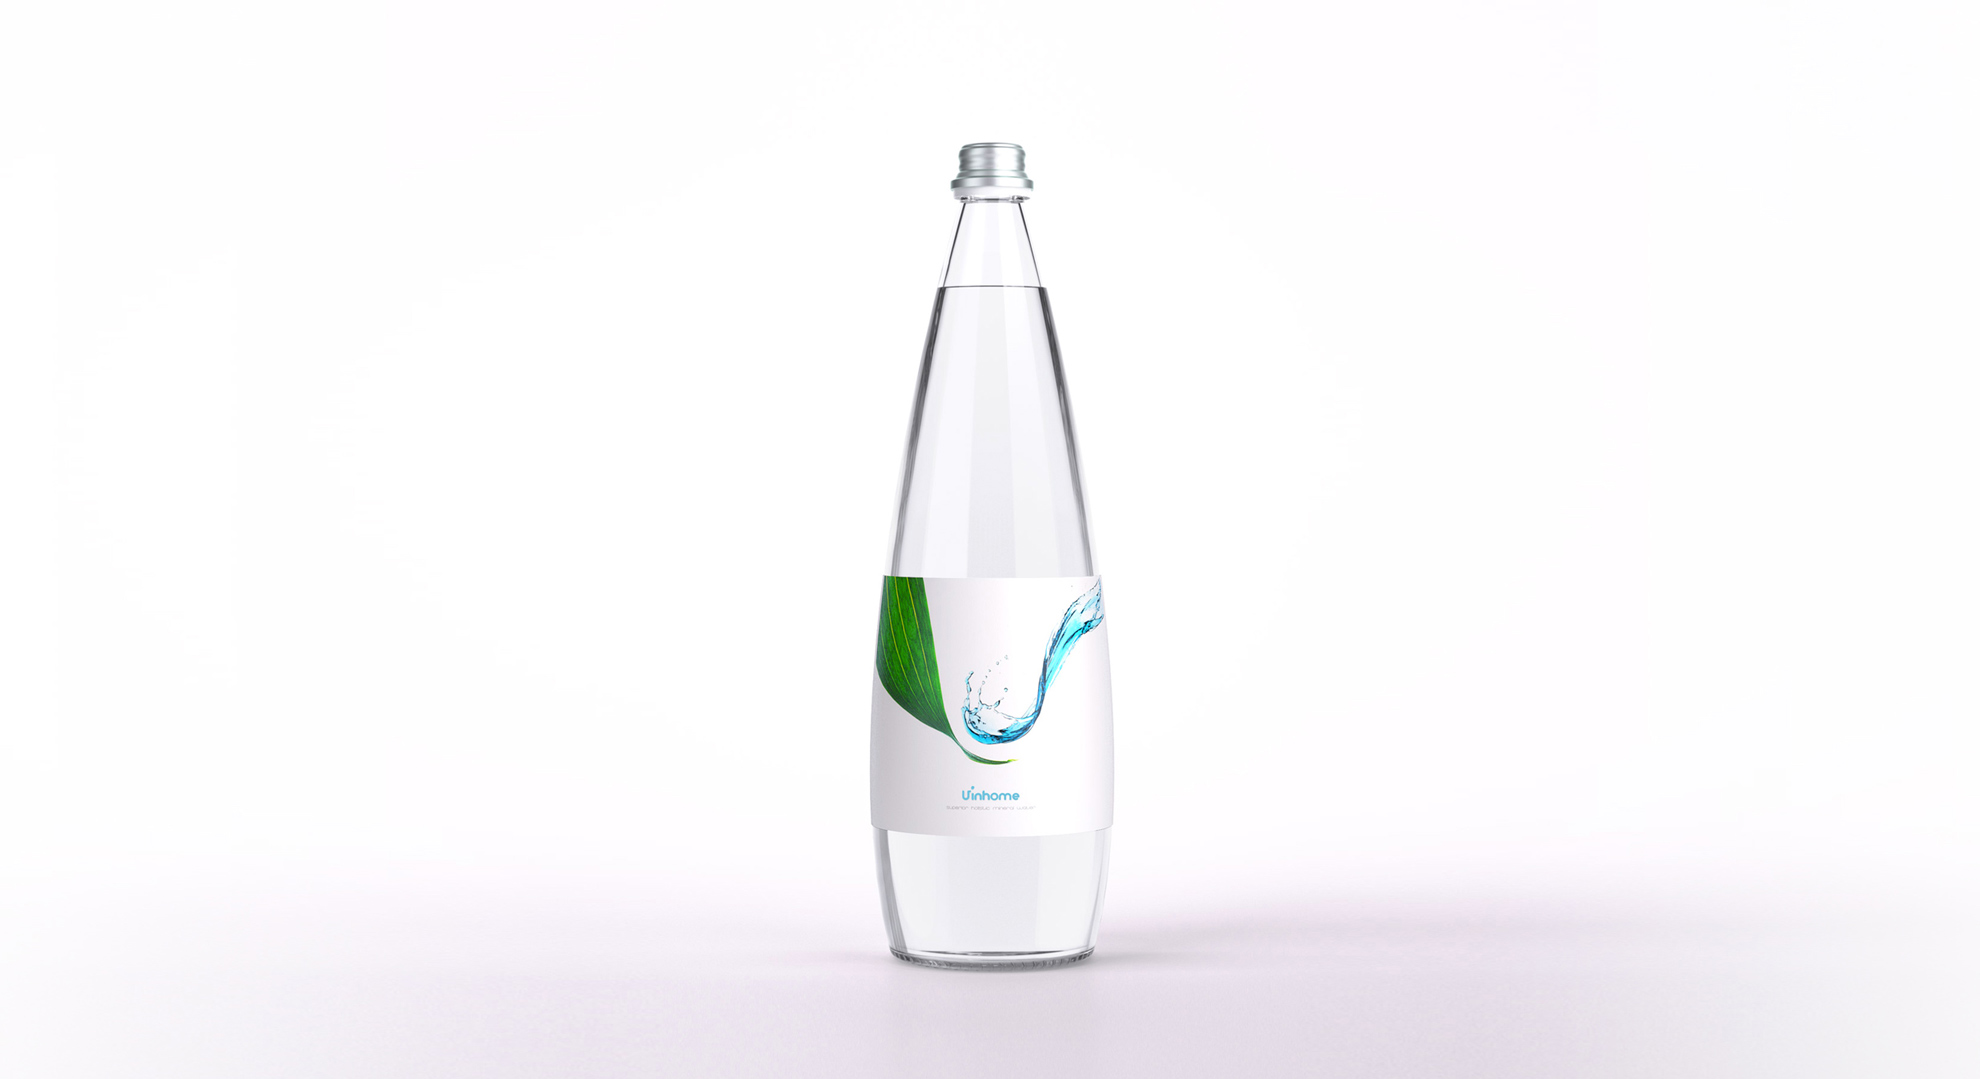 Uinhome mineral water pack and corporate image